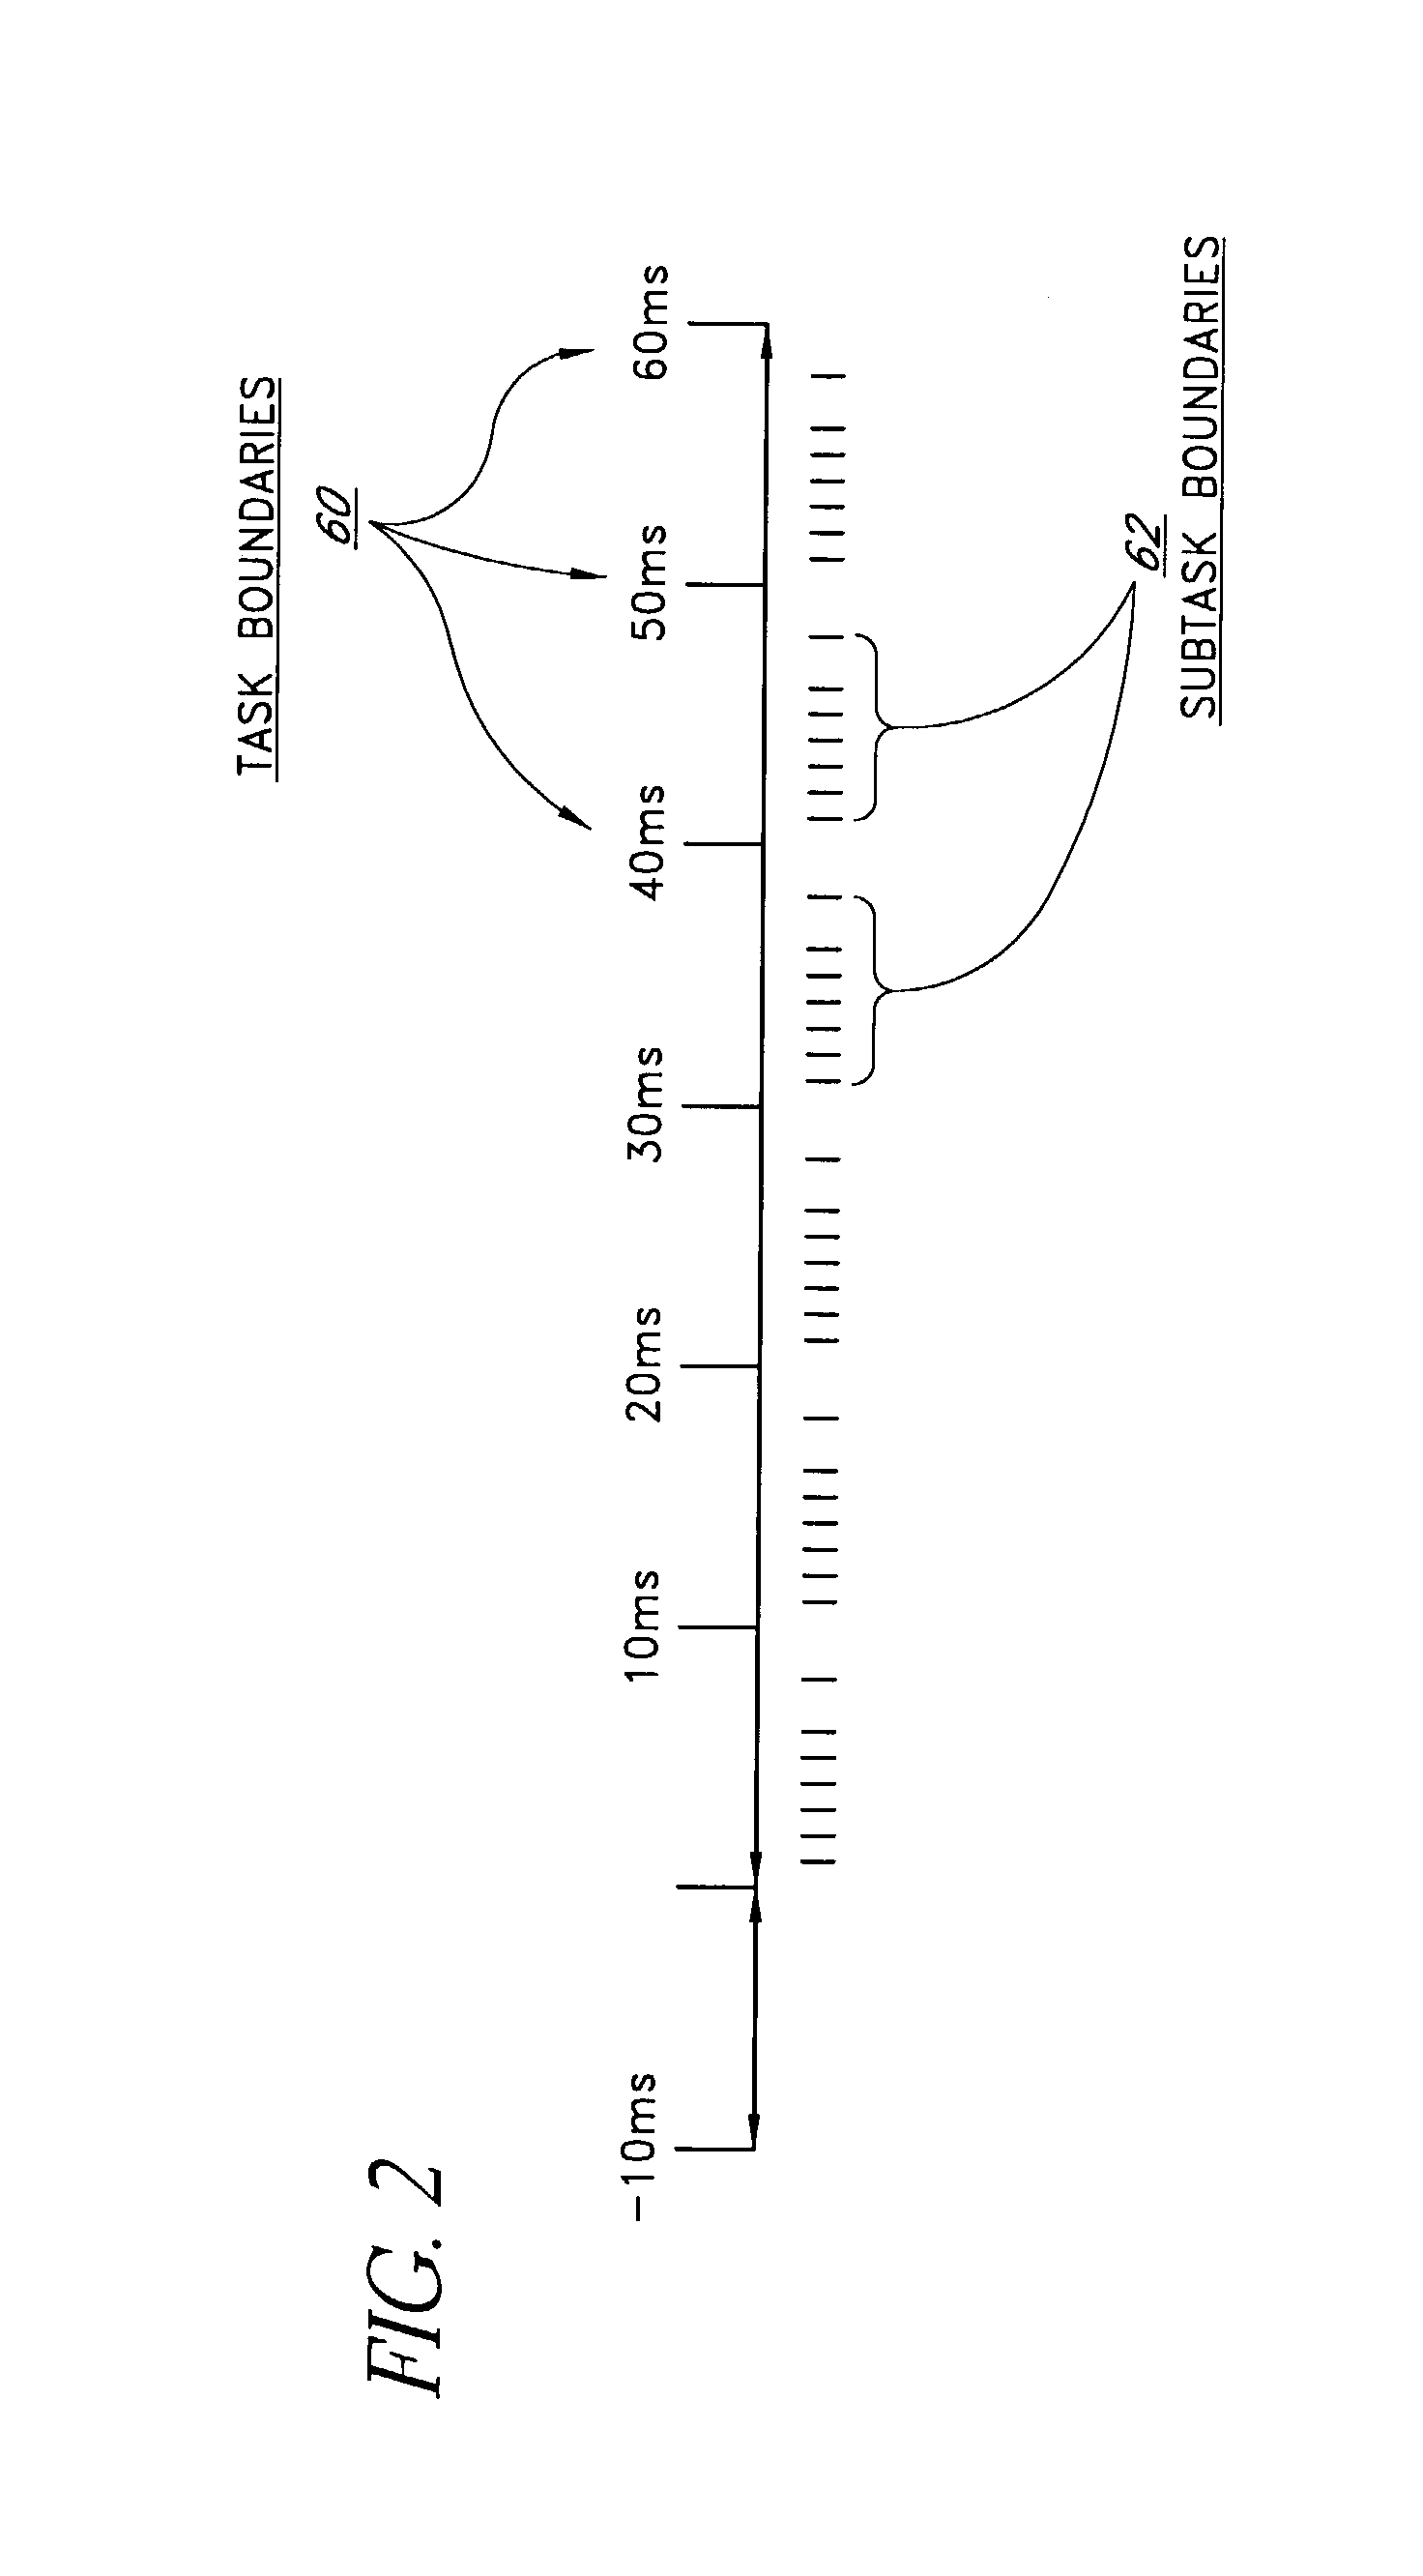 Processor cluster architecture and associated parallel processing methods